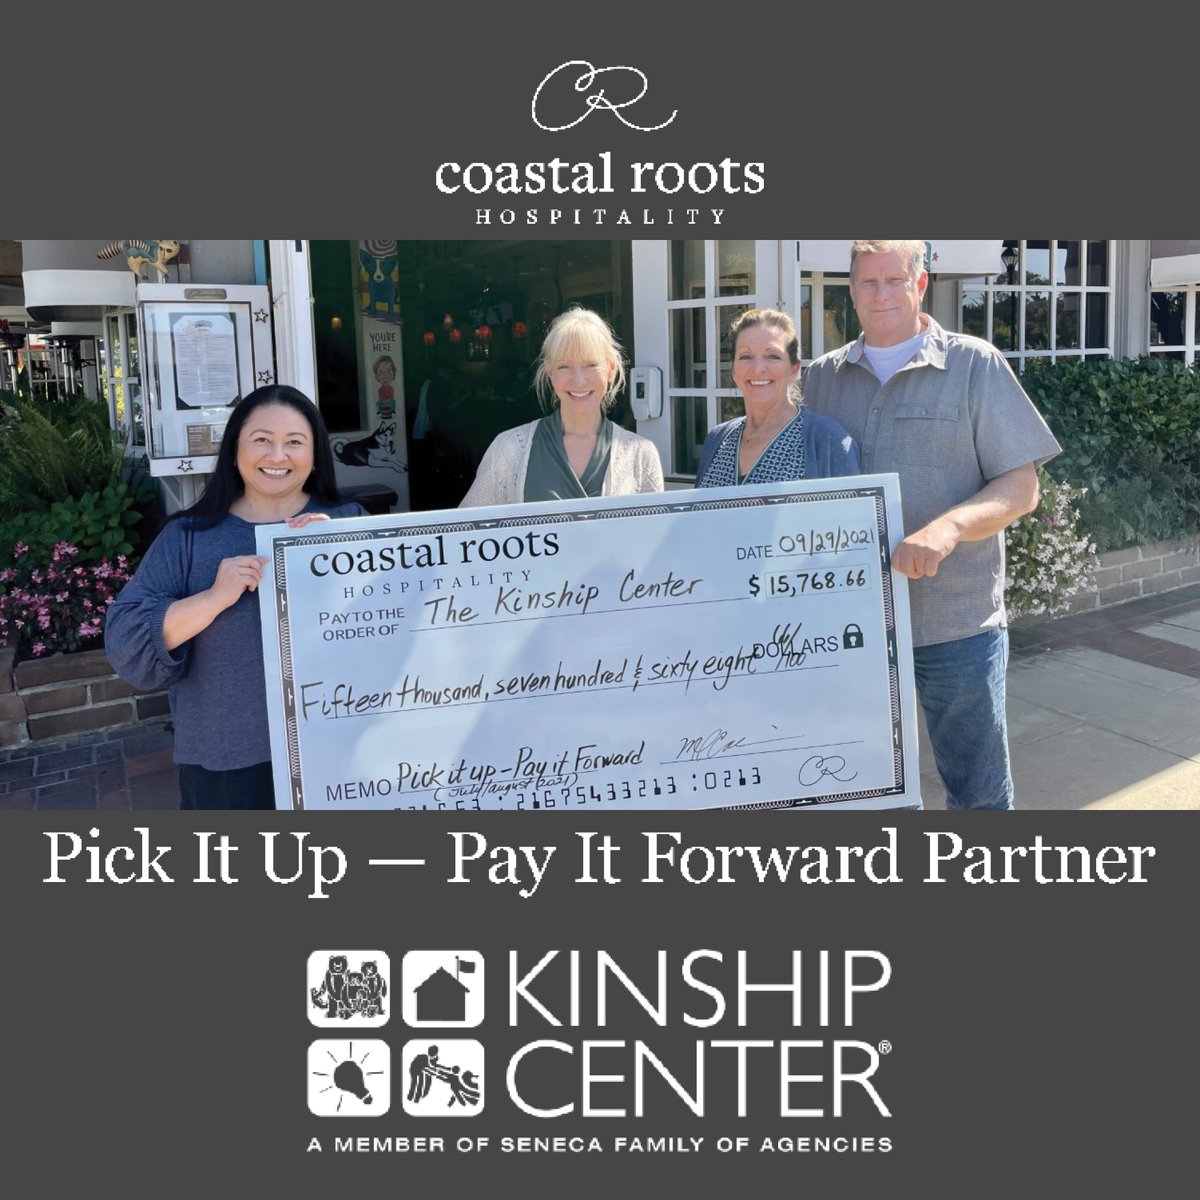 We are excited to announce that Kinship Center has once again been selected as a recipient of Coastal Roots Hospitality’s #PickitUpPayitForward campaign. During March and April, 10% of all take-out order sales at #Tarpys and #RioGrill will be donated to Kinship Center! #kinship